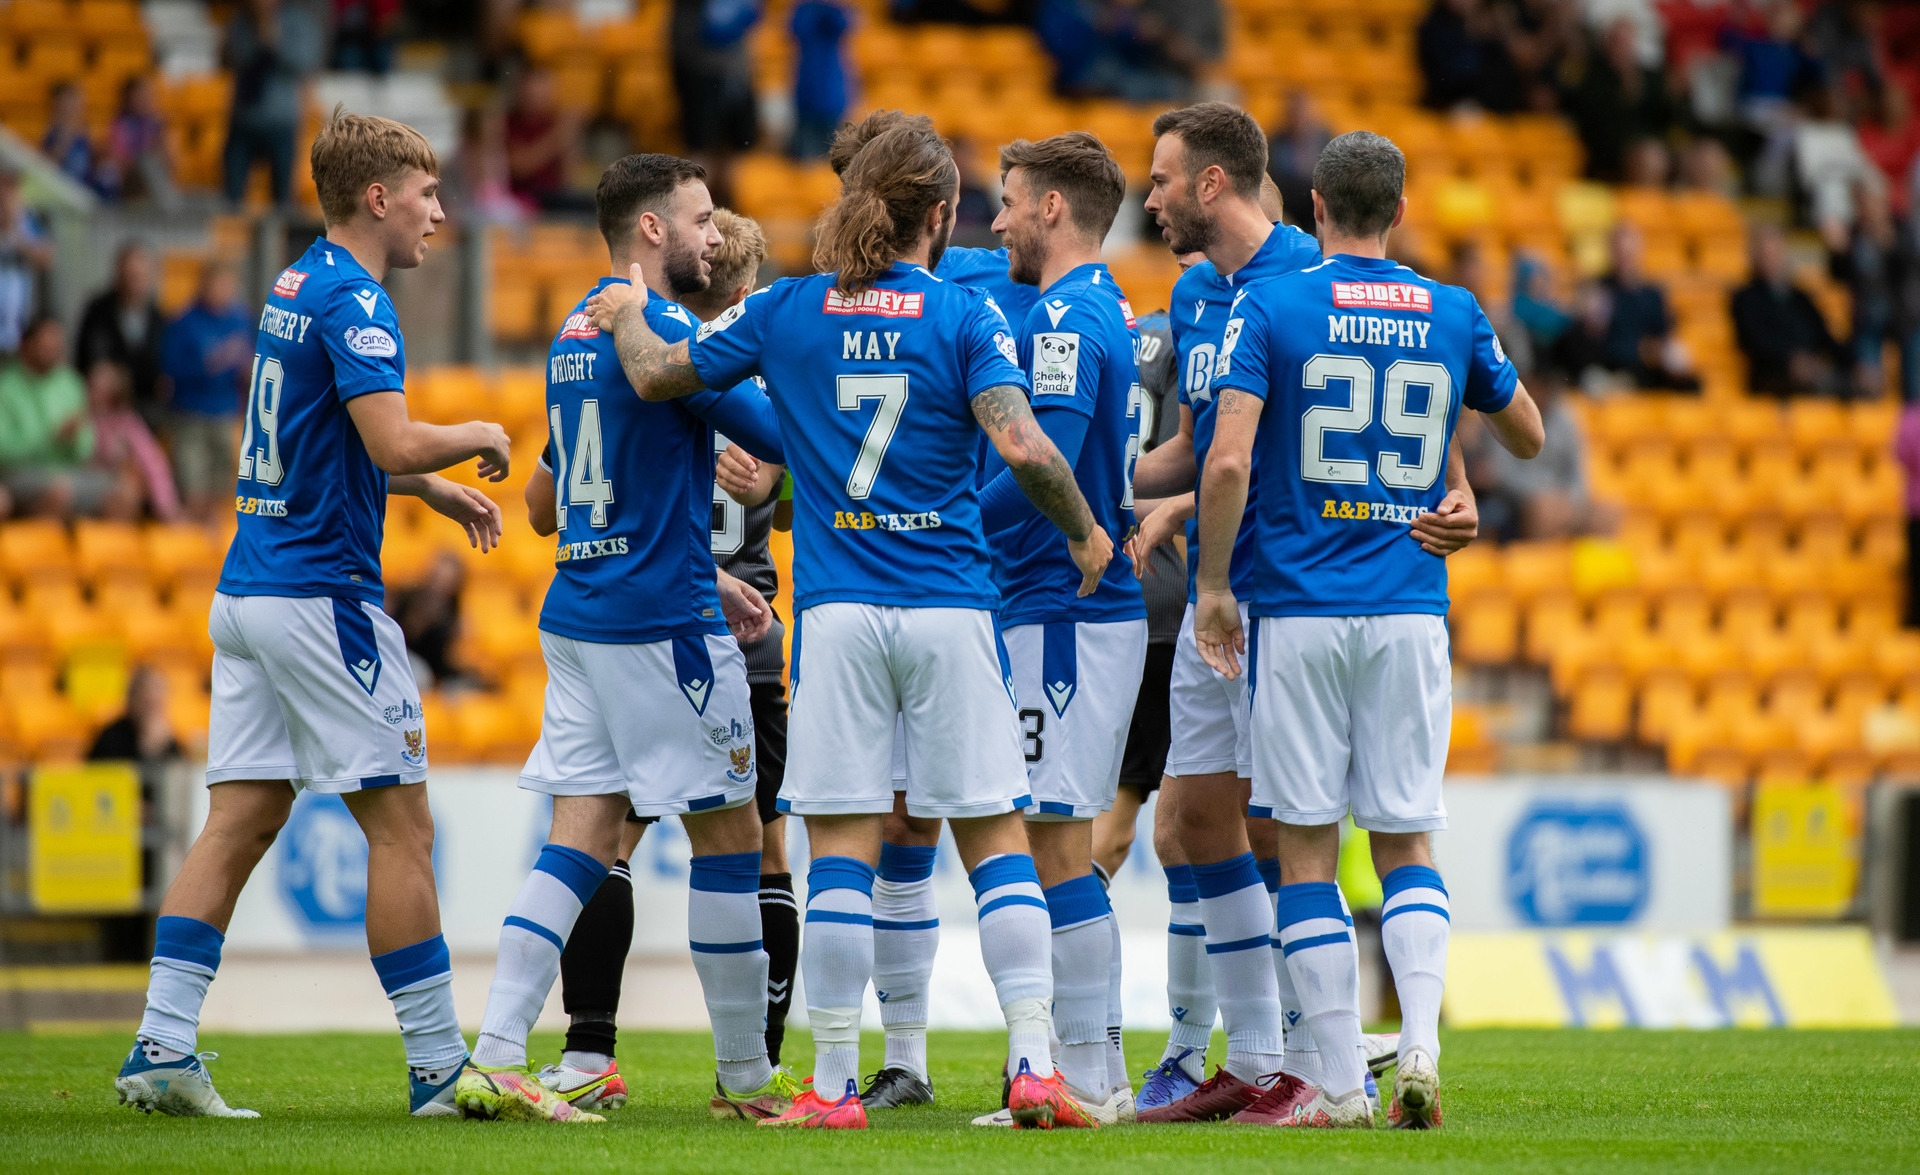 St Johnstone struggled in the Premier Sports Cup. (Photo by Euan Cherry / SNS Group)